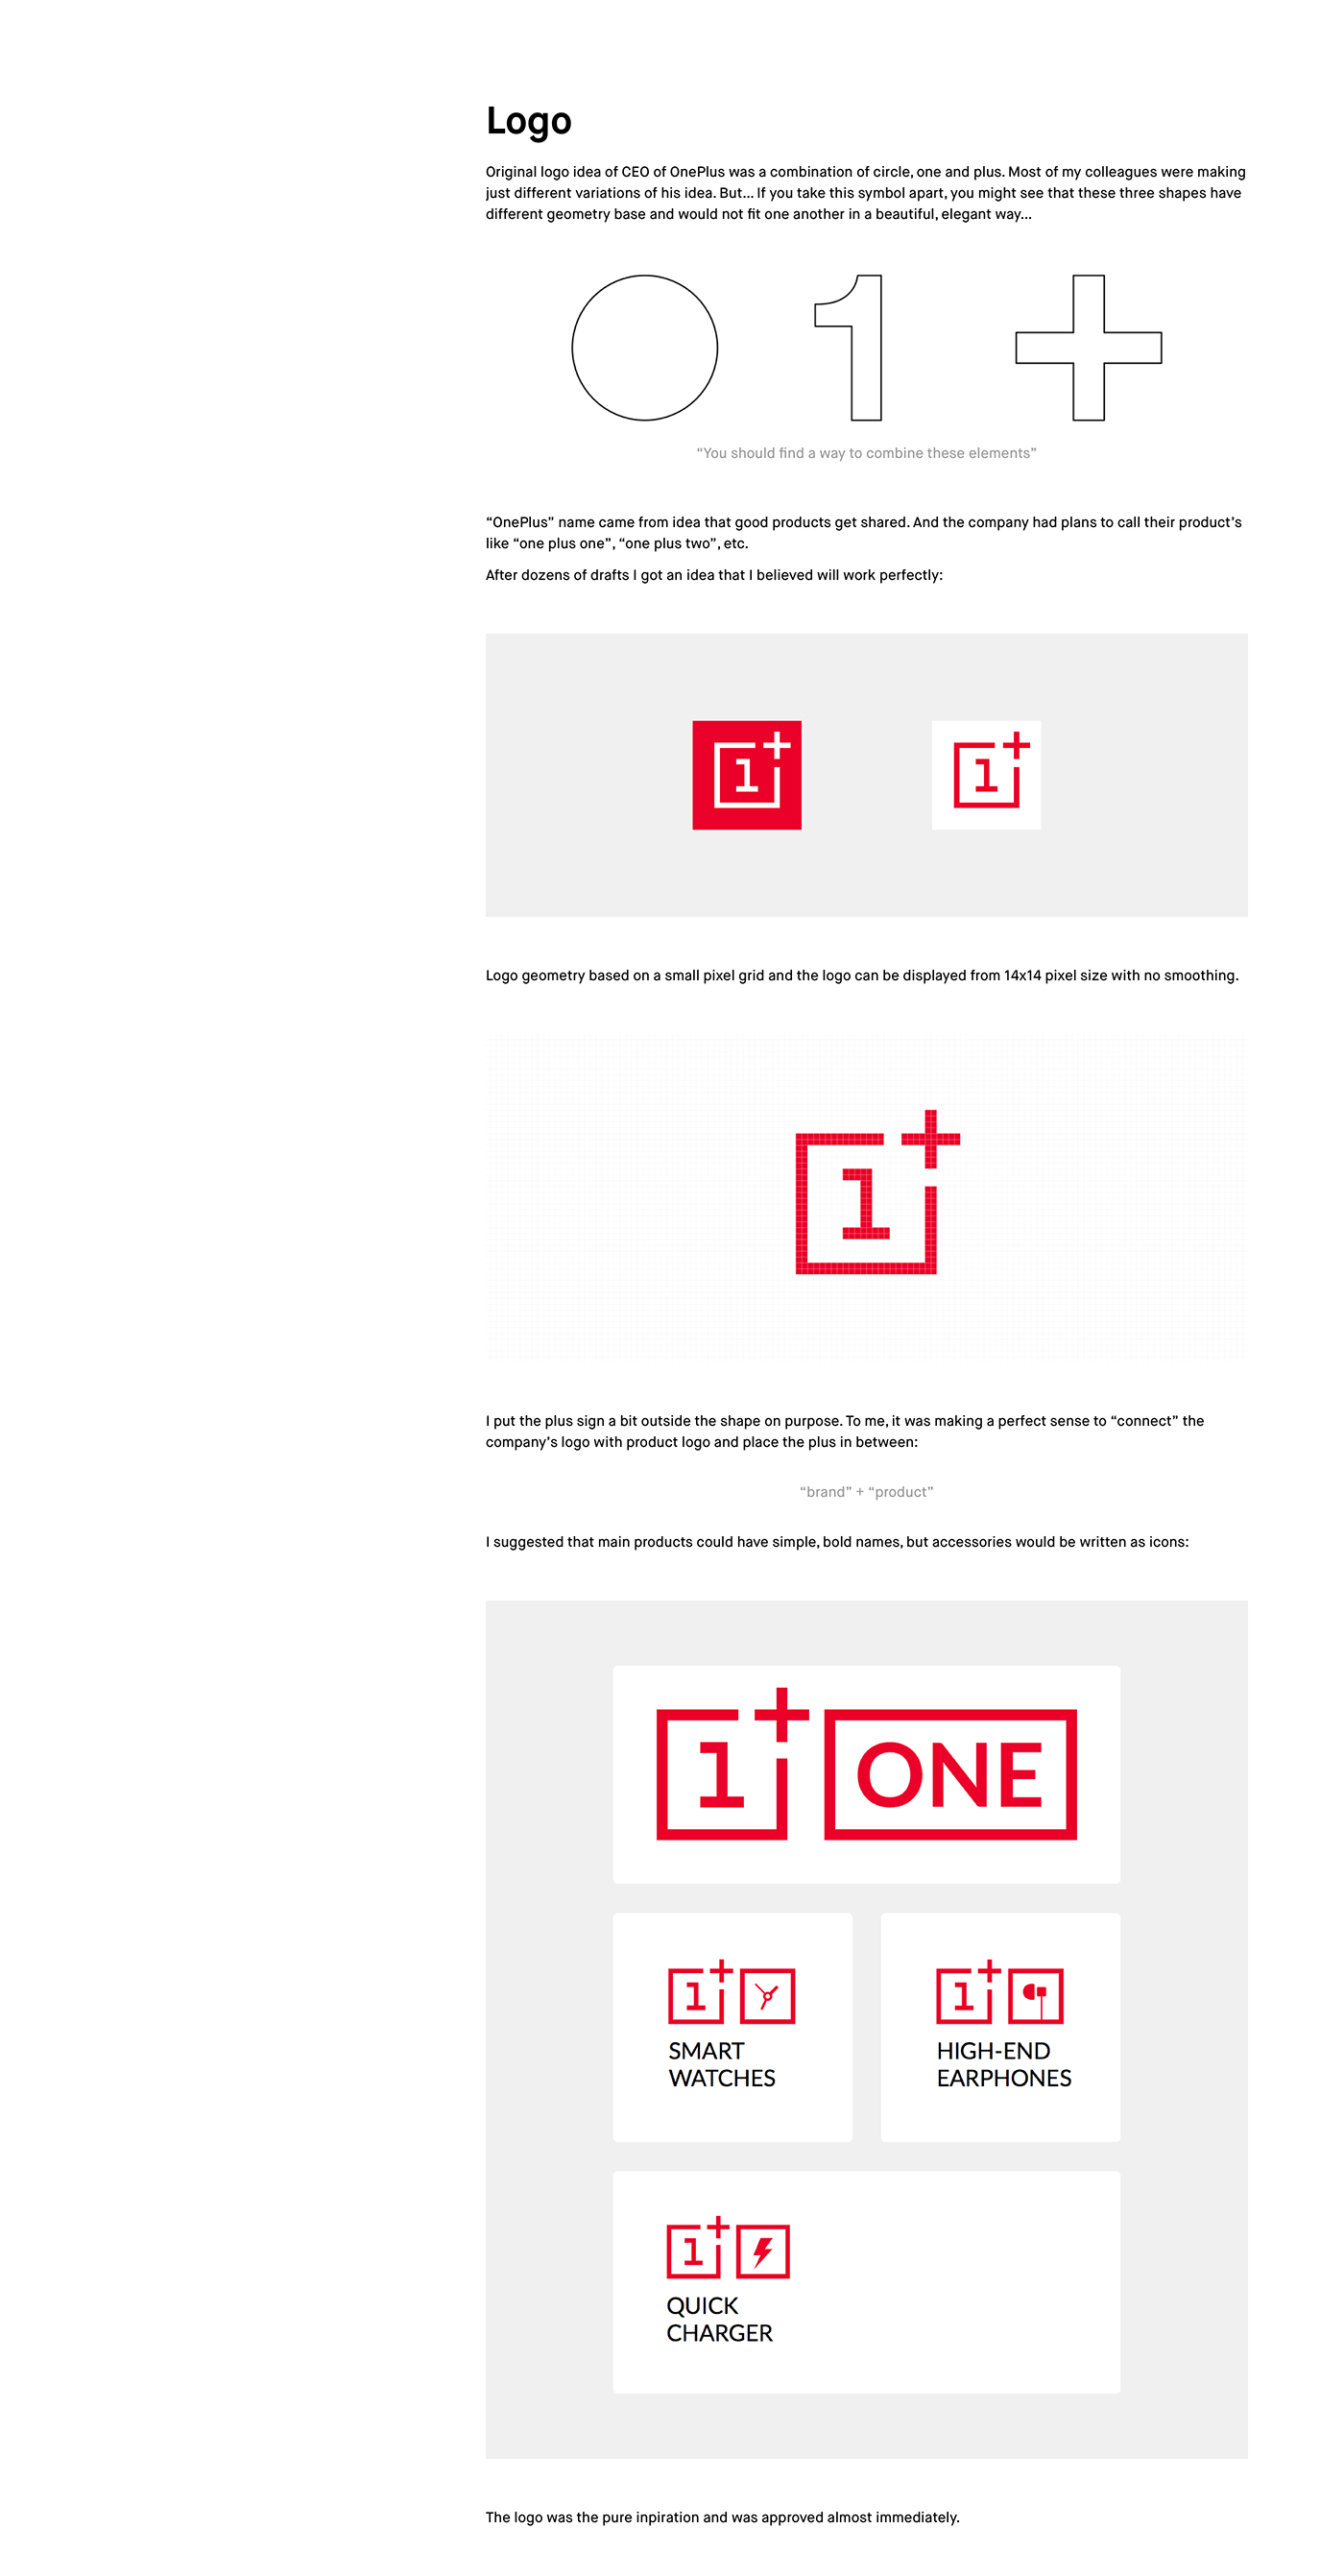 Plus Sign Company Logo - Logo & Identity for OnePlus Android Smartphone brand on Behance